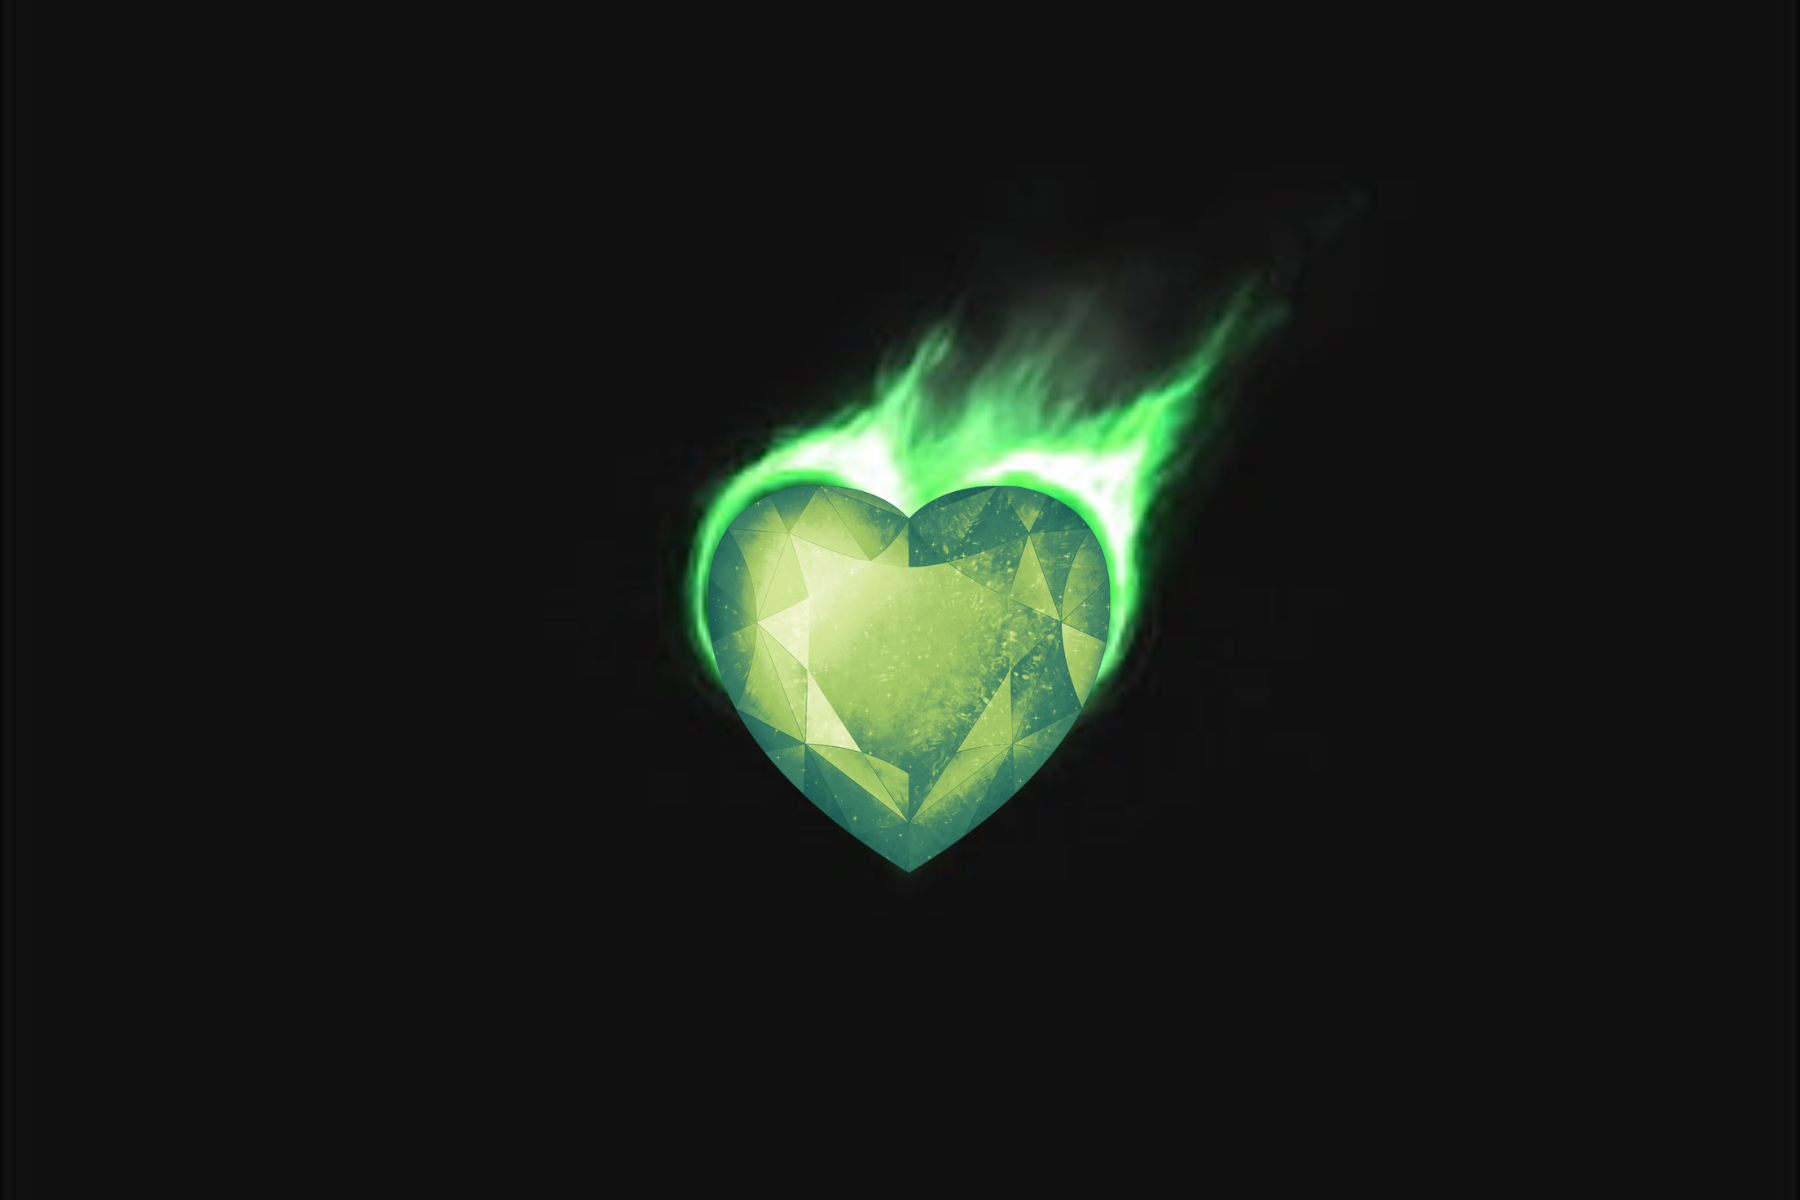 A heart-shaped green emerald with a green fire